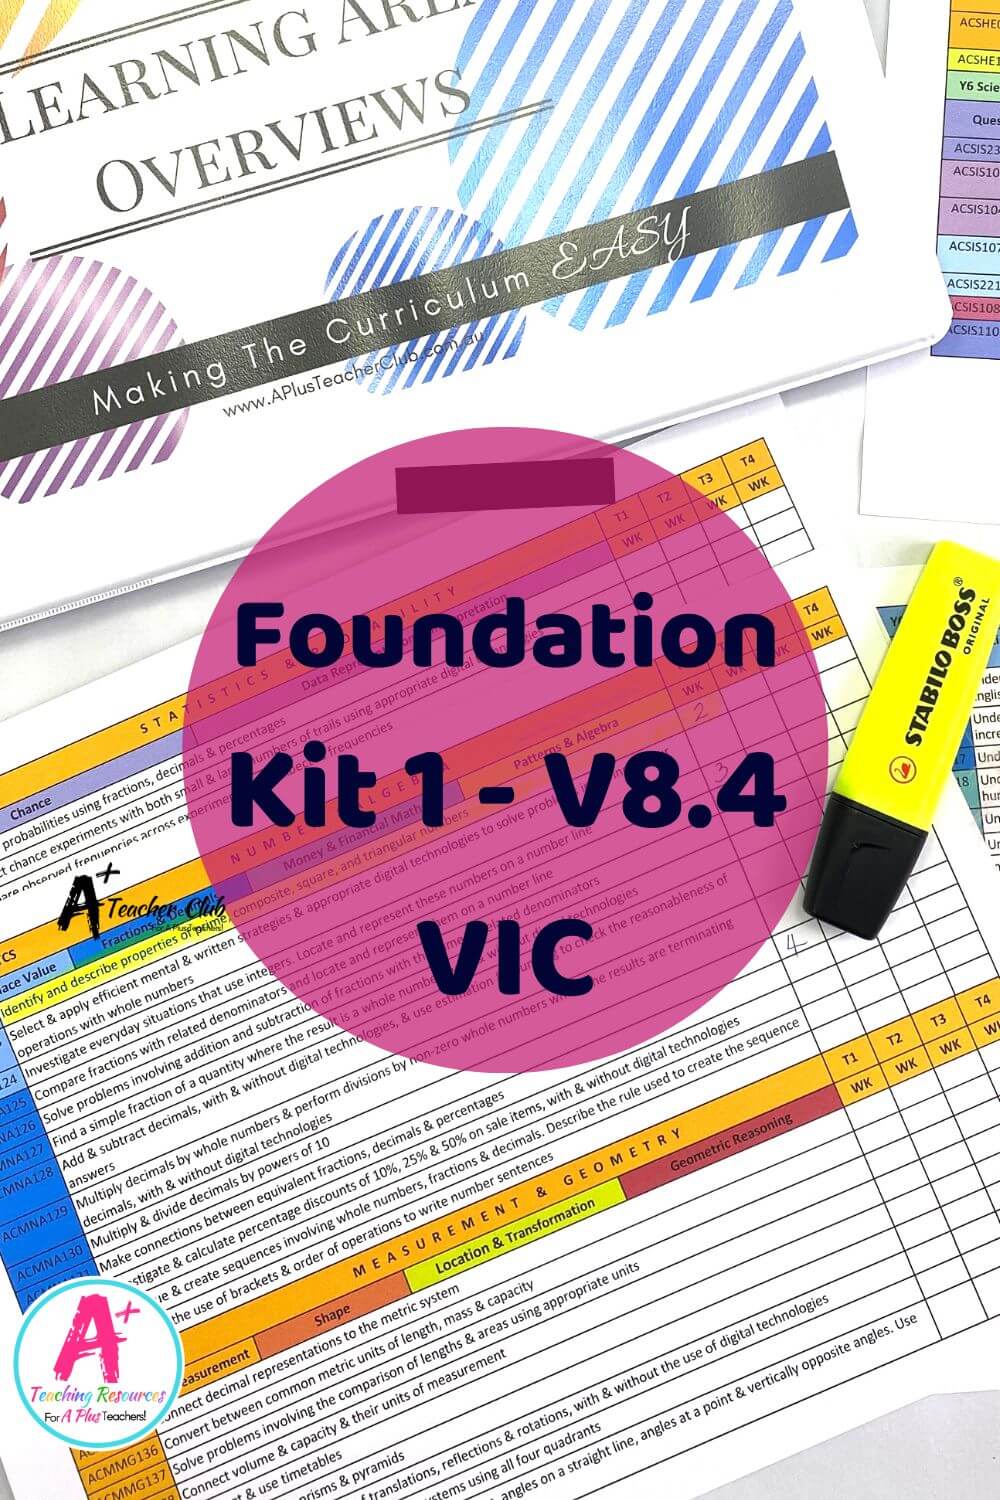 Foundation Years Forward Planning Curriculum Overview VIC 8.4